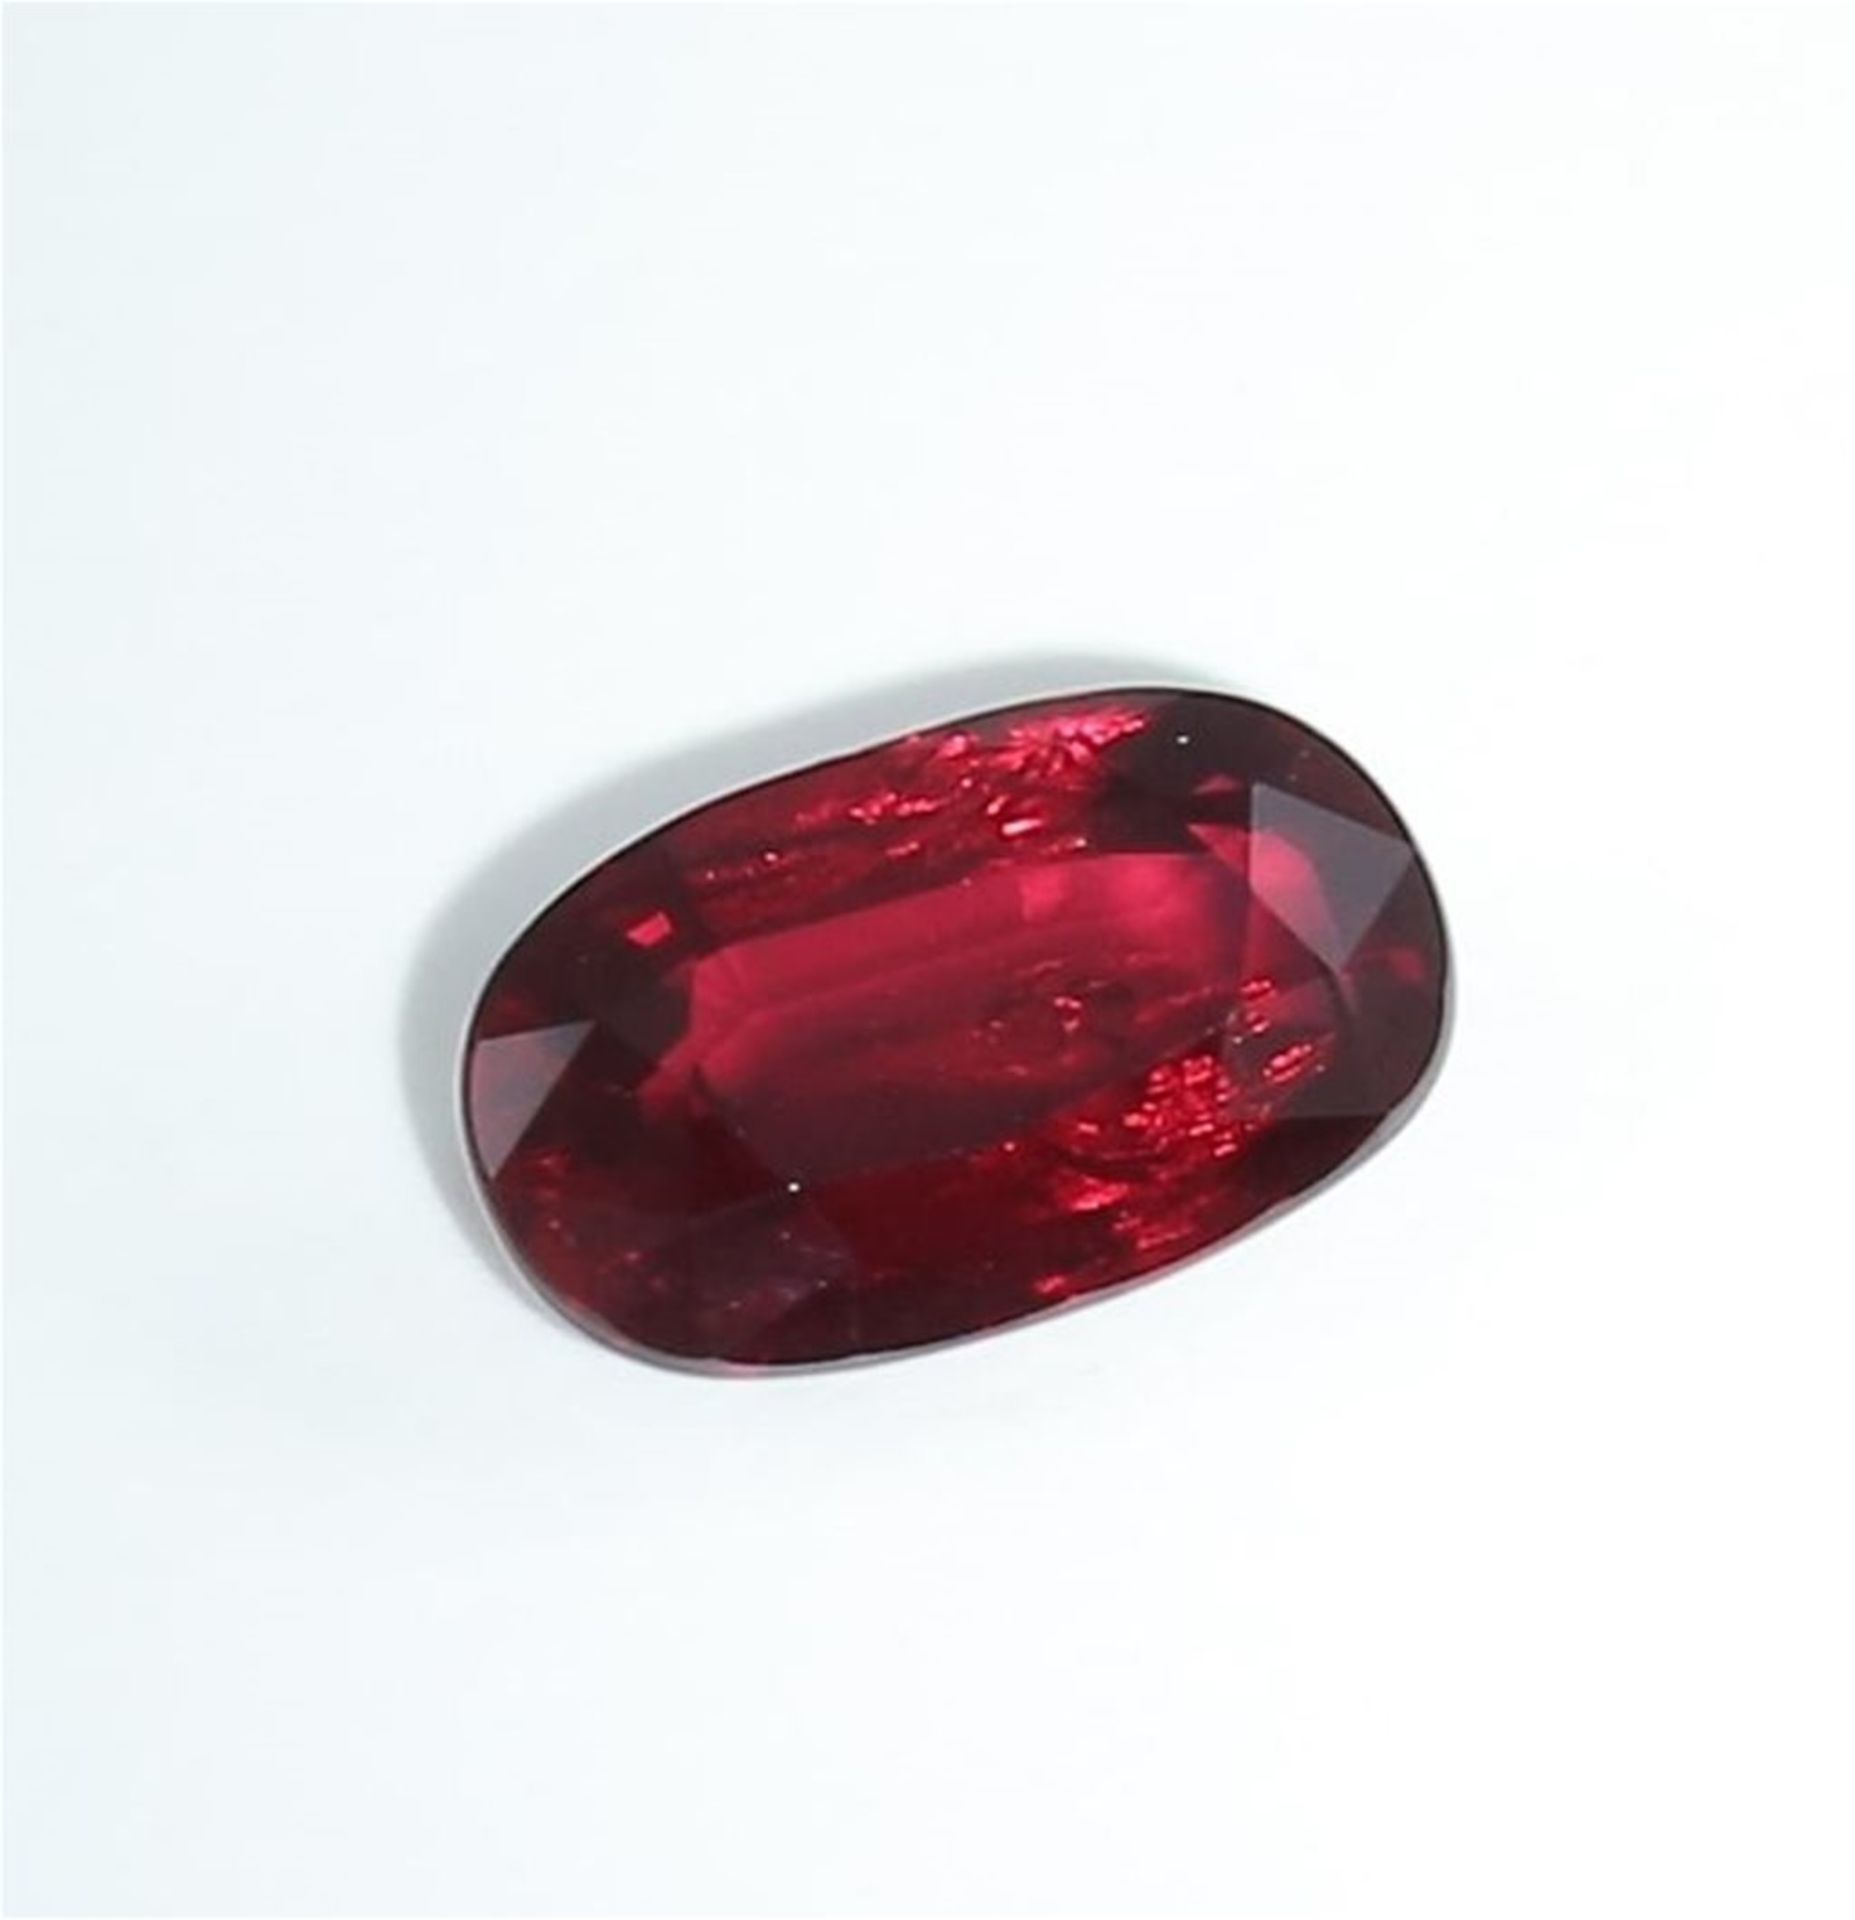 GRS Certified 5.02 ct. “Pigeon Blood” Ruby - Image 3 of 10